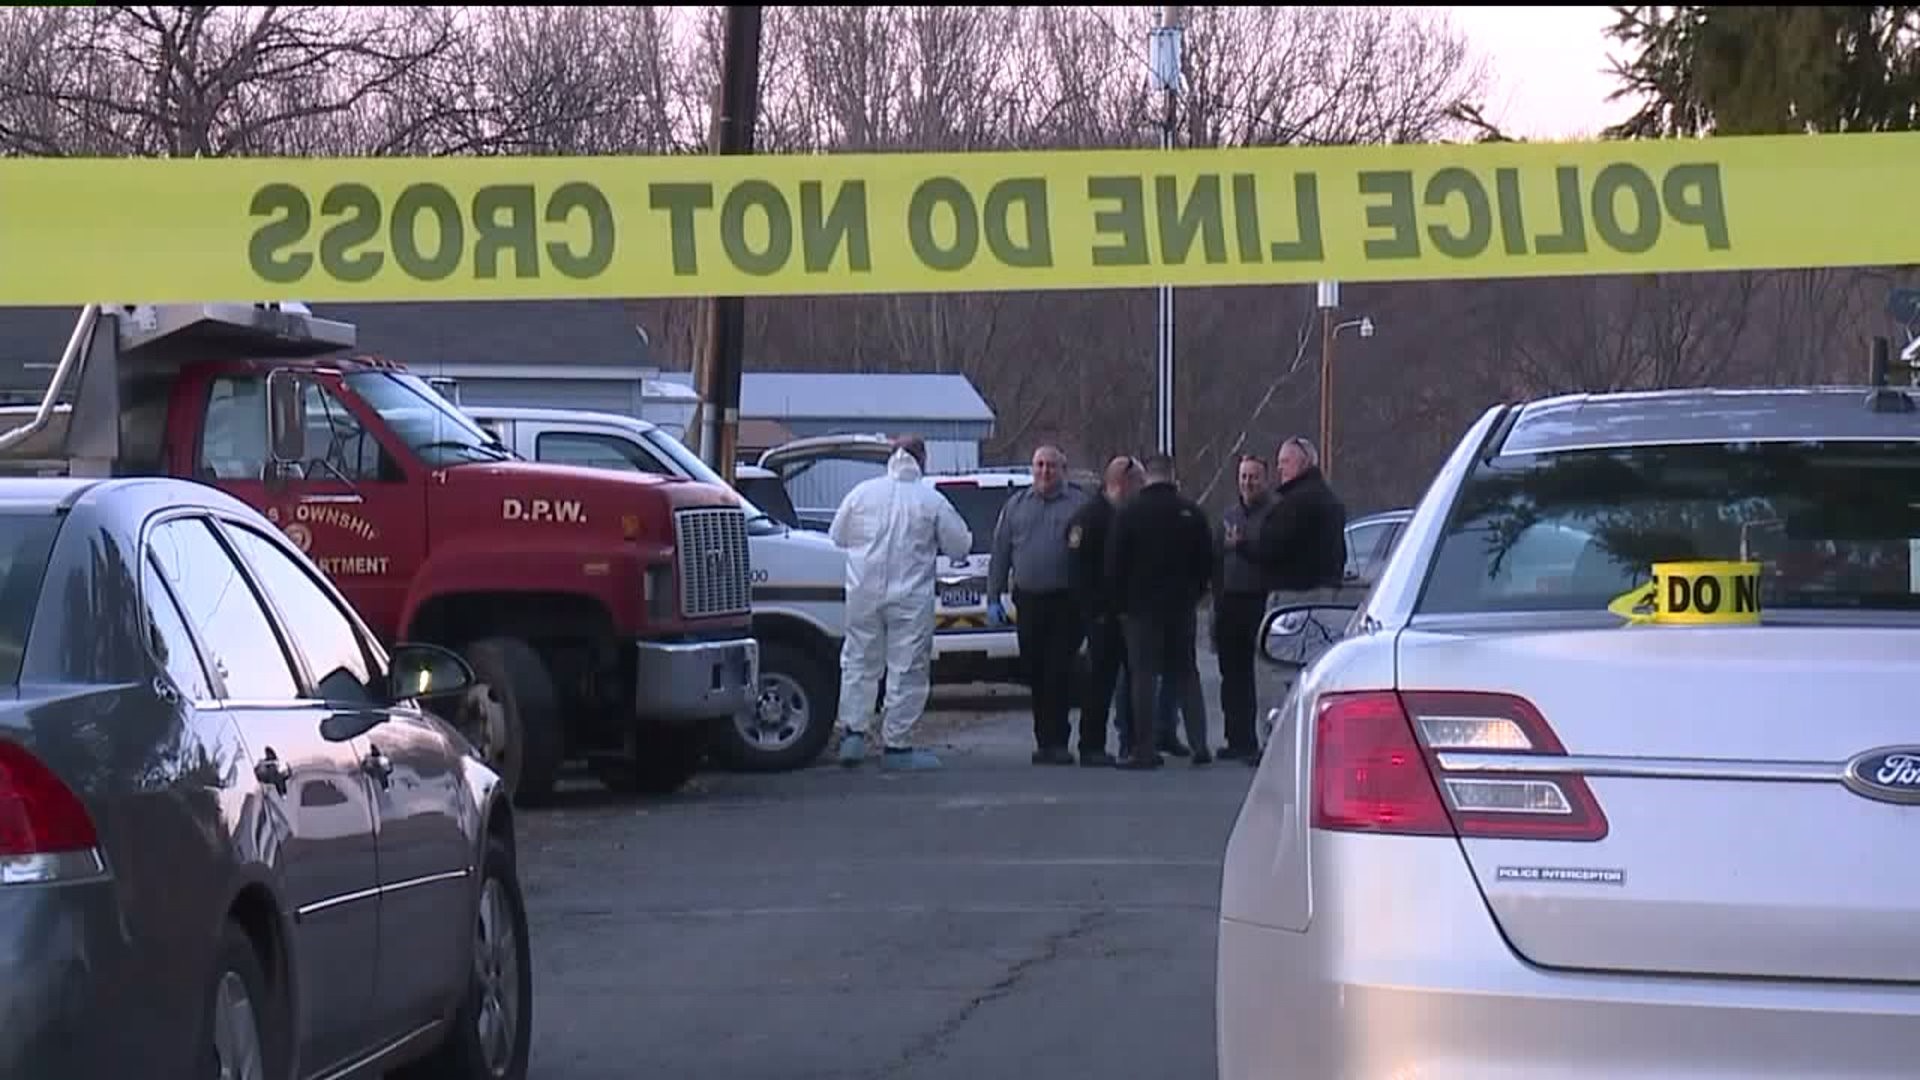 Search Warrant Reveals New Information About Human Remains Found in Luzerne County